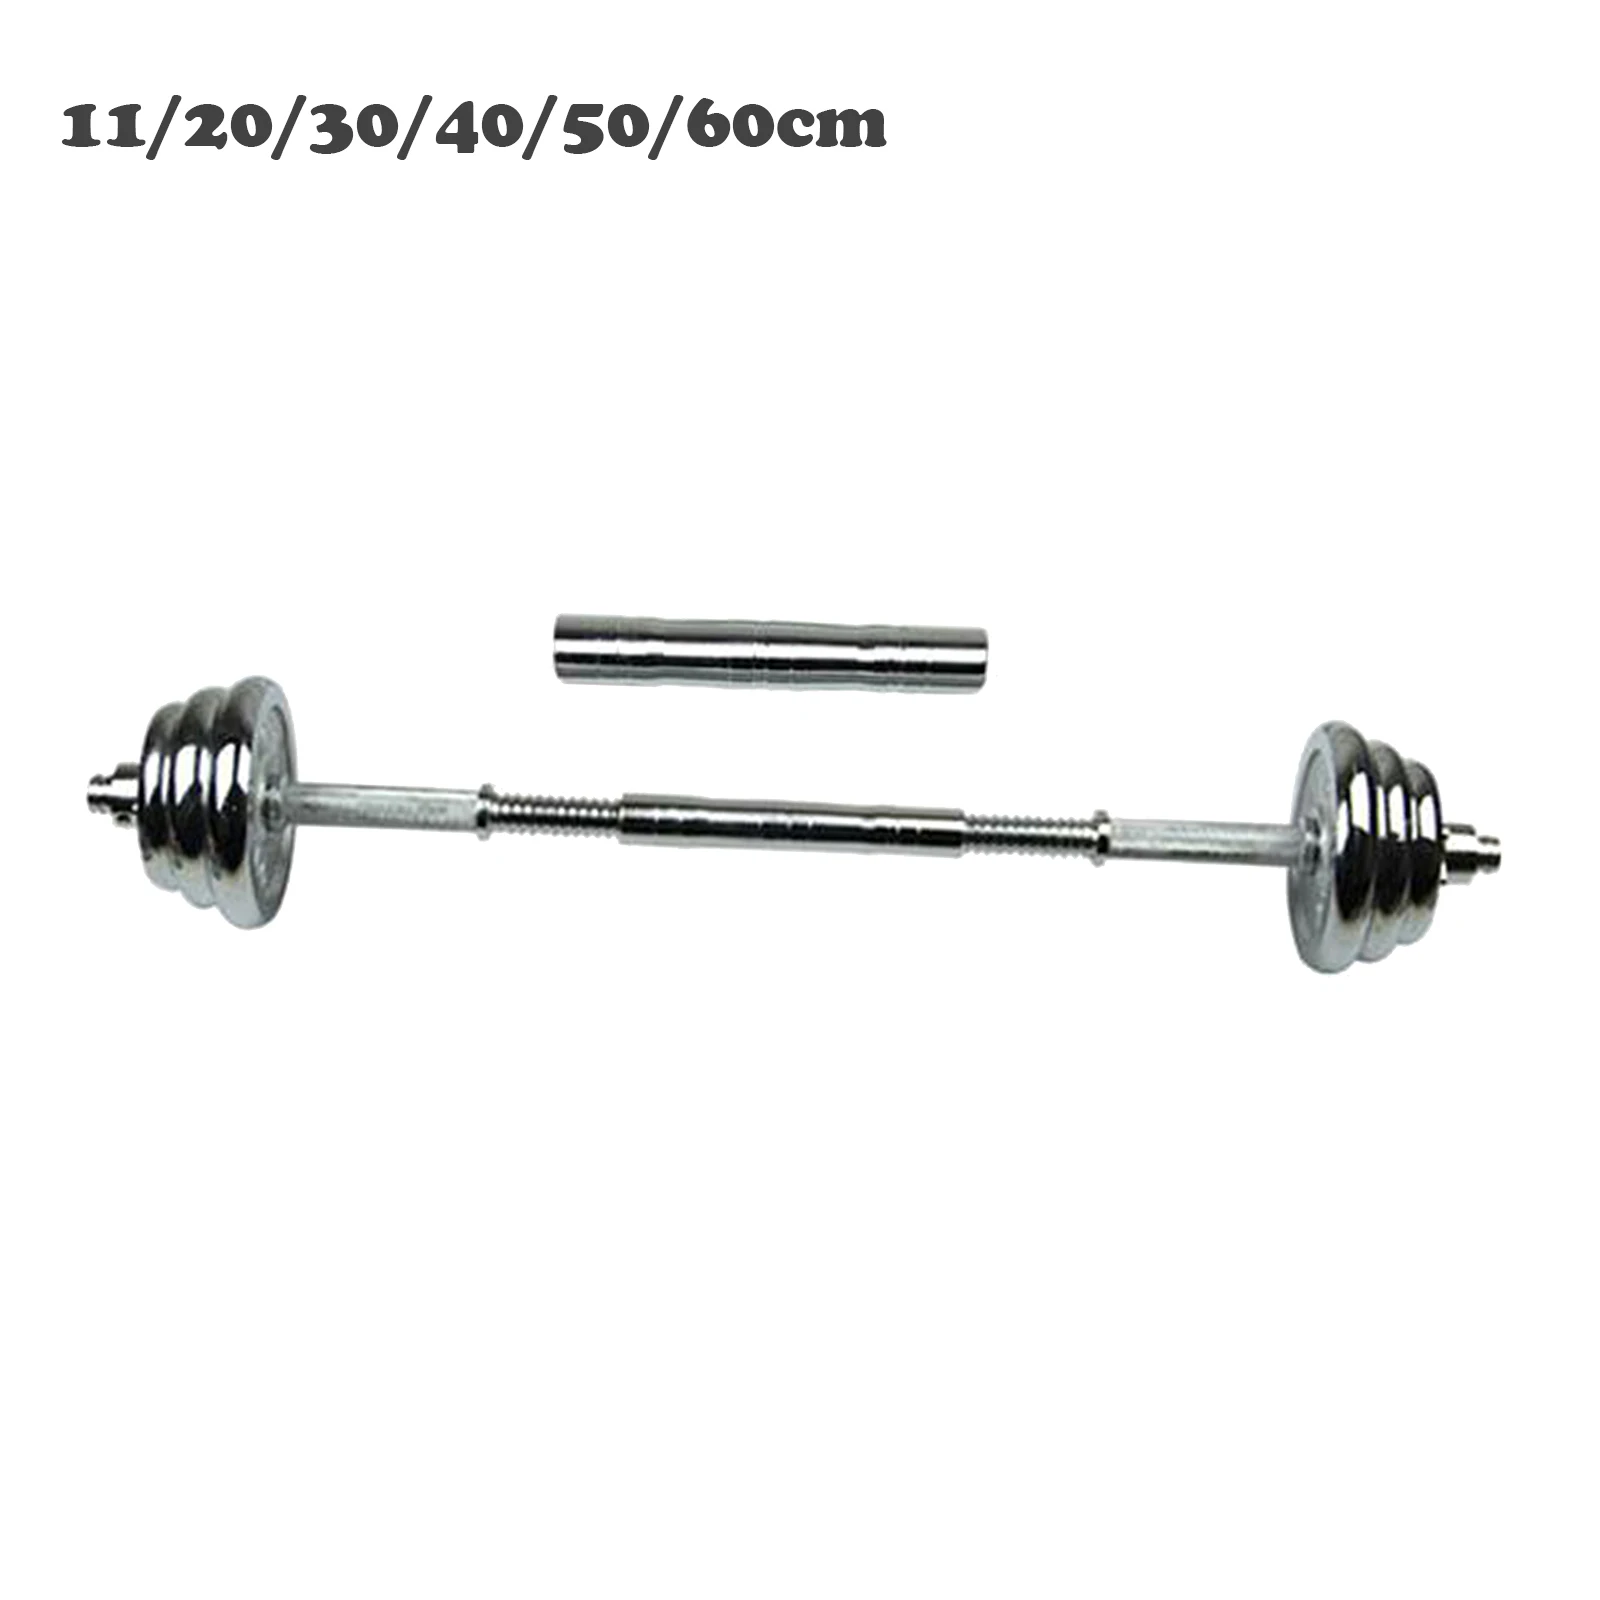 Dumbbell Connecting Rod Barbell Build Extension Bar Weight Light Connector Bar Weightlifting Equipment Accessories- 3 Sizes